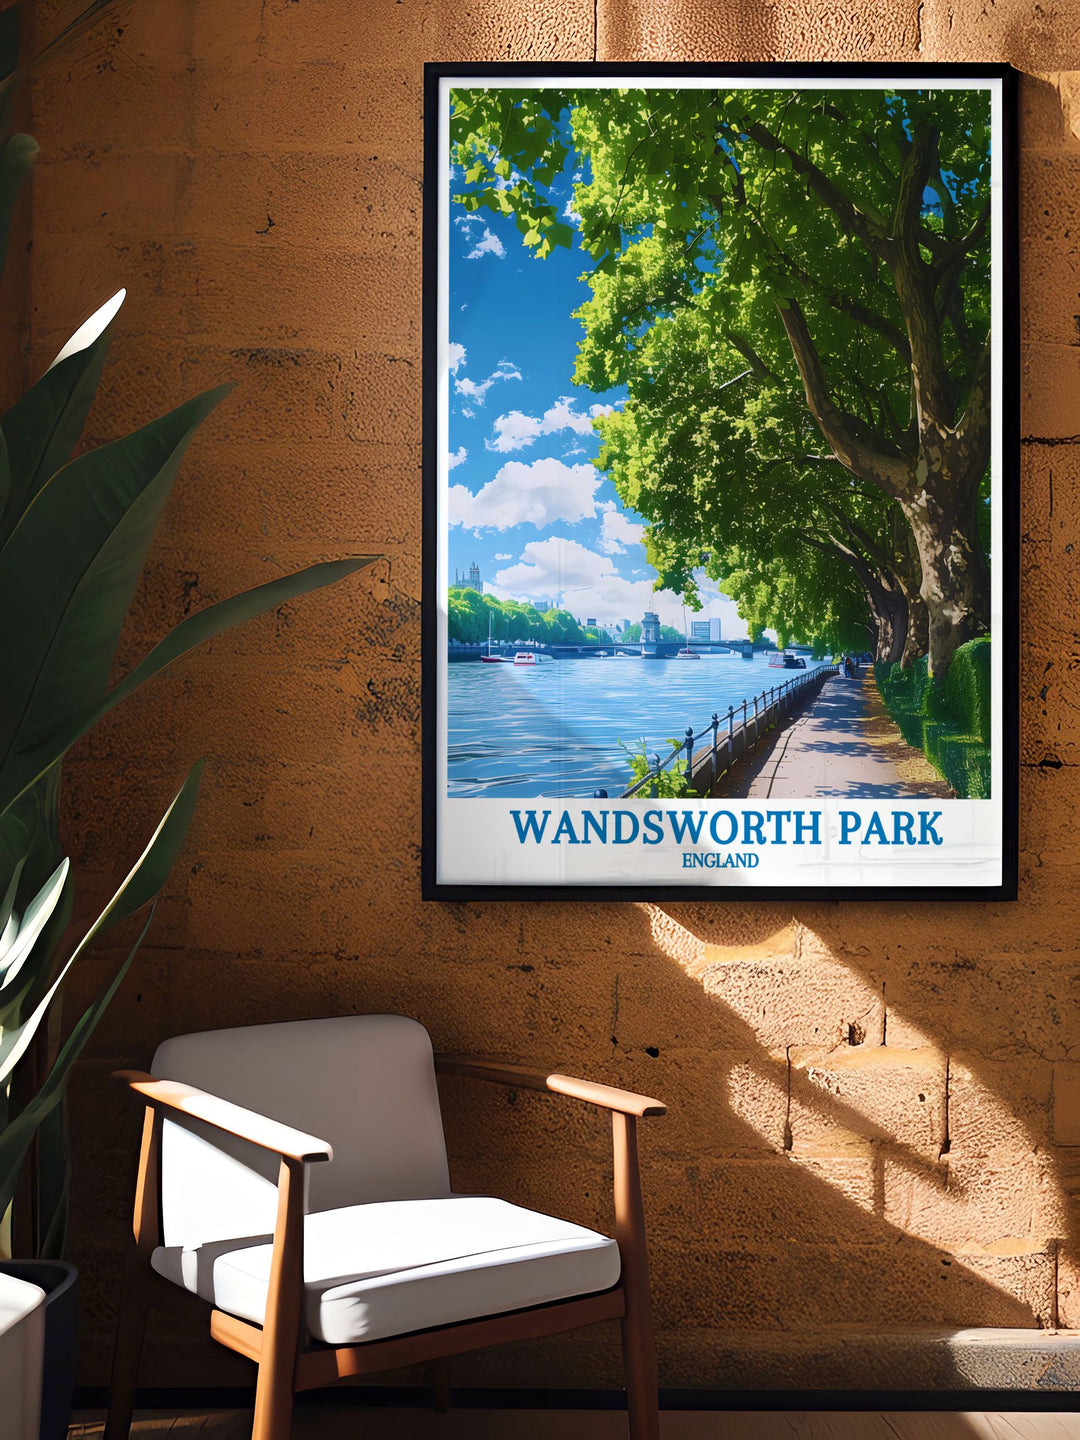 This canvas art of Wandsworth Parks riverside walk captures the enchanting beauty of the parks greenery and river views. An ideal addition for those looking to create a focal point in their home that celebrates Londons green spaces, it brings a sense of peace and historical charm to your living environment.